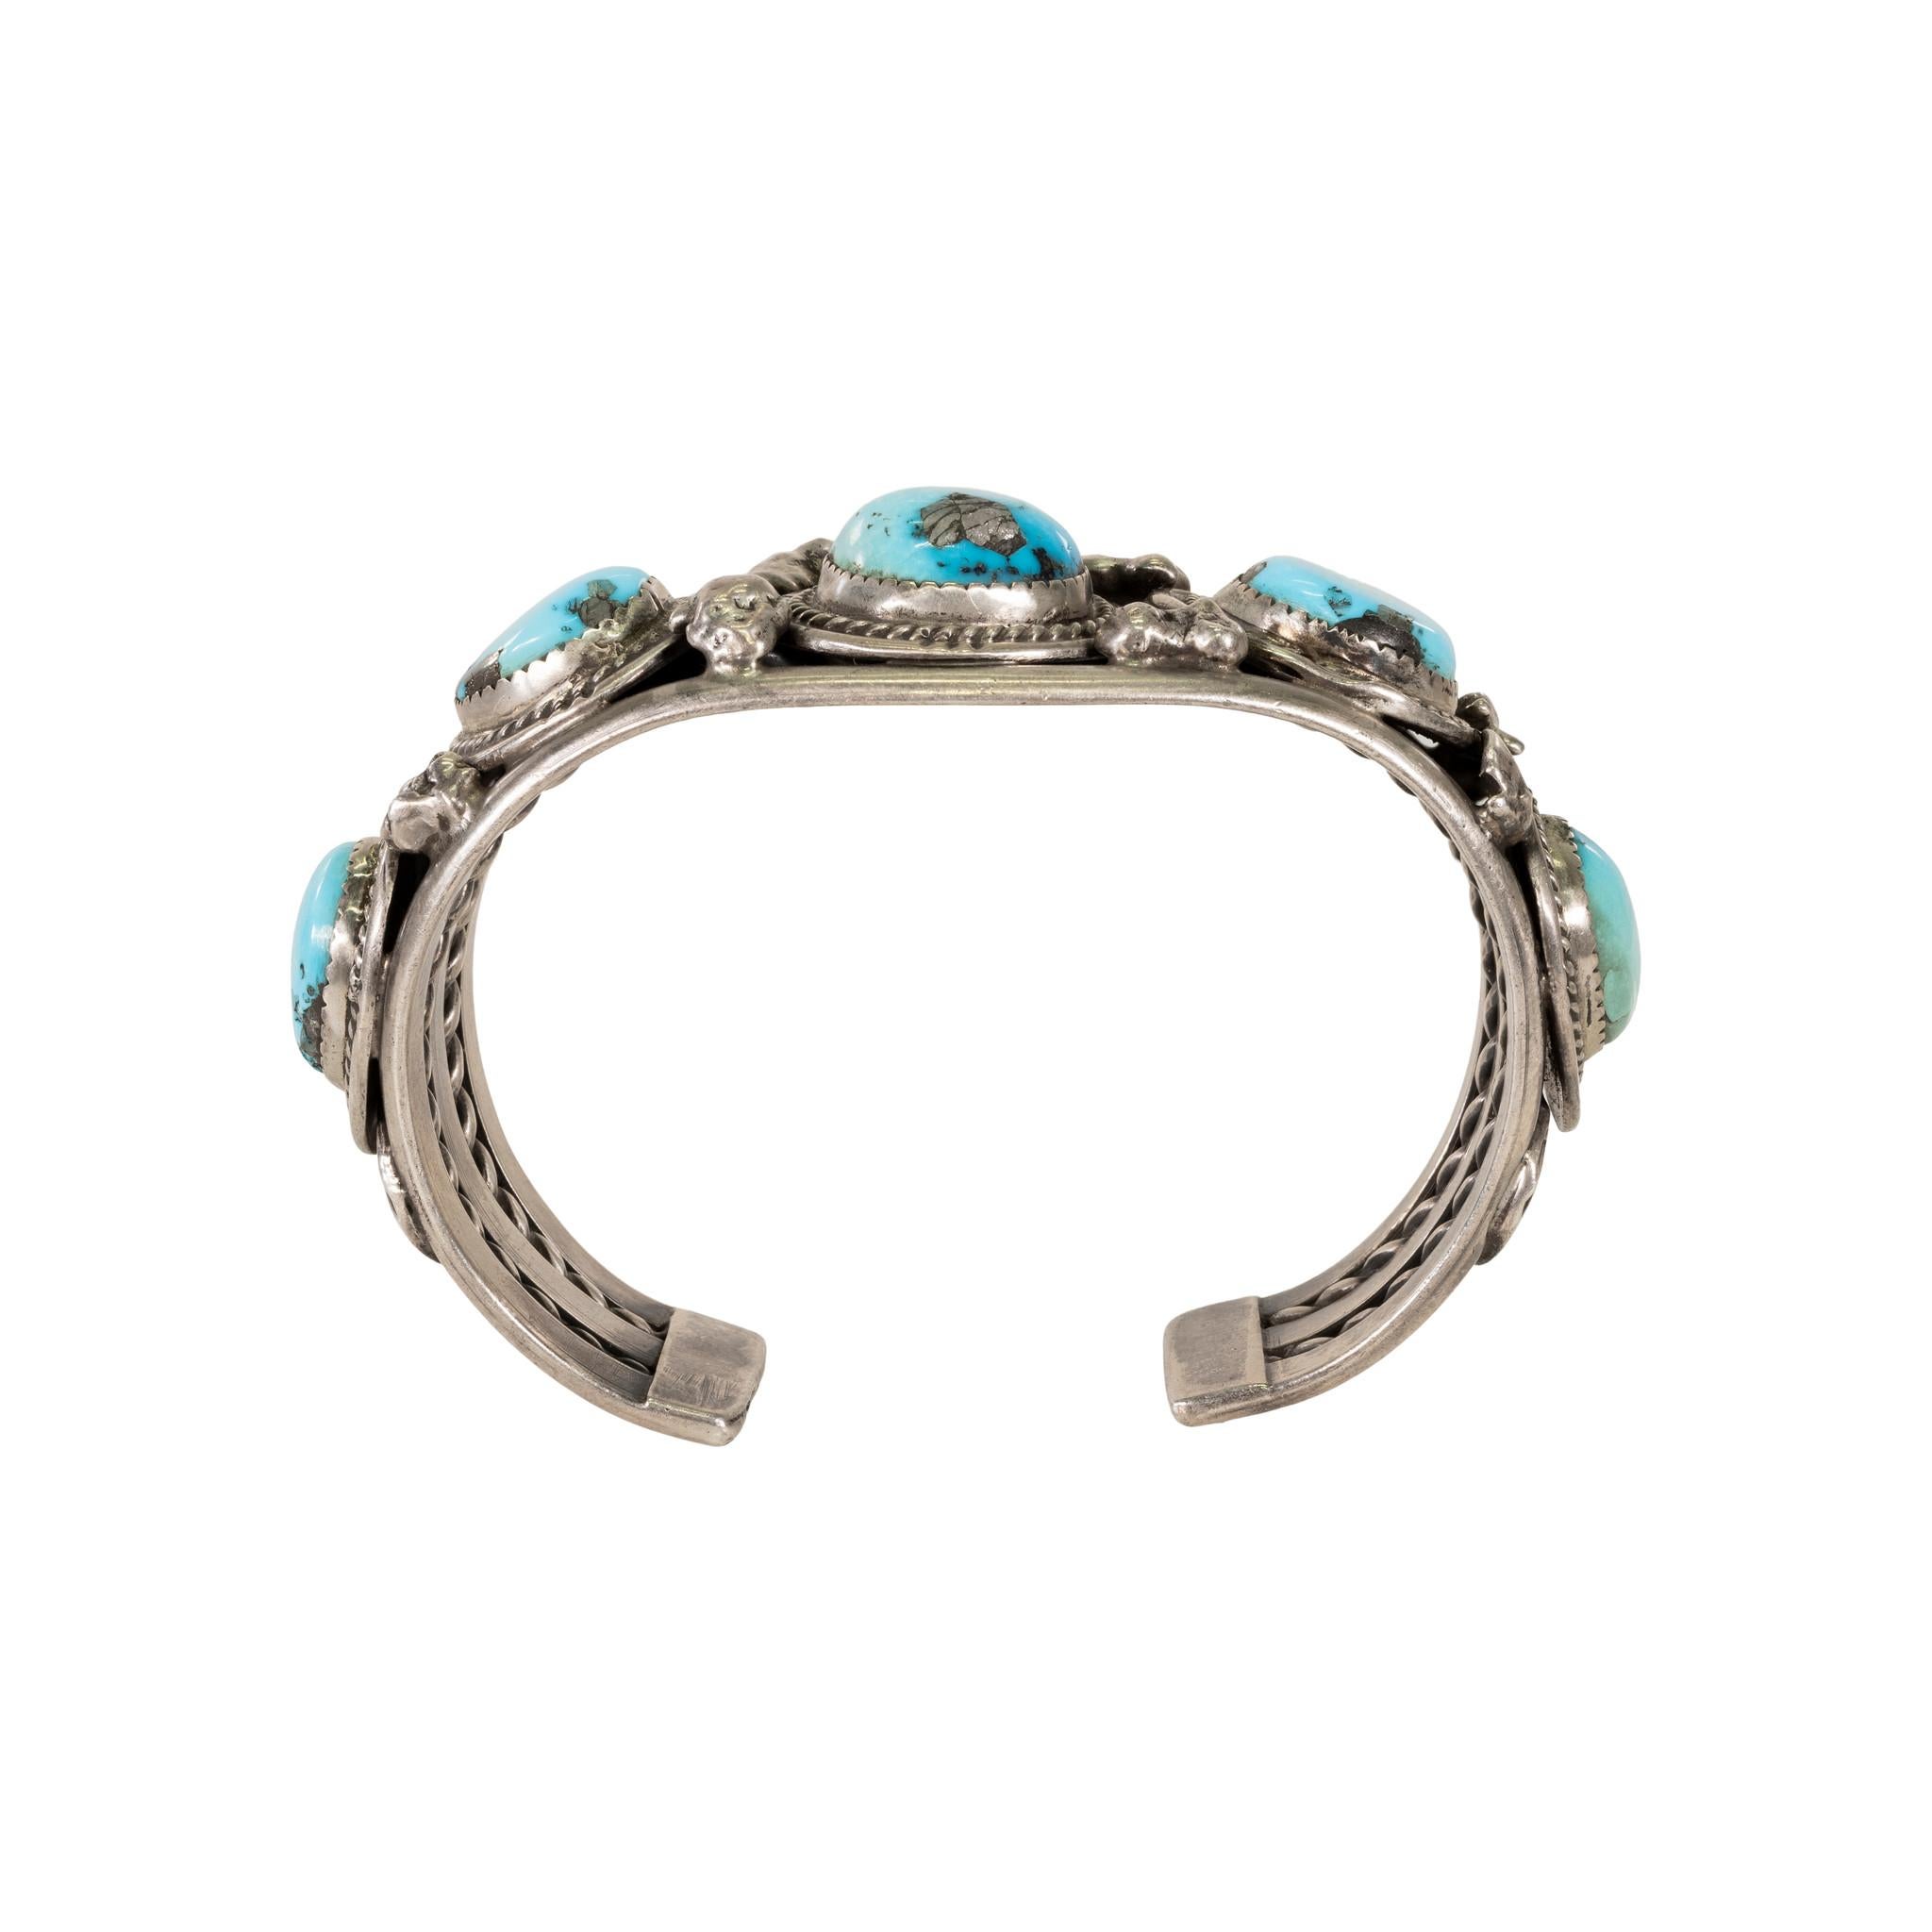 Navajo Kingman turquoise bracelet with five nuggets surrounded by twisted rope border. Turquoise is stunning lighter blue color of excellent quality. 

PERIOD: After 1950
ORIGIN: Navajo, Southwest
SIZE: 7